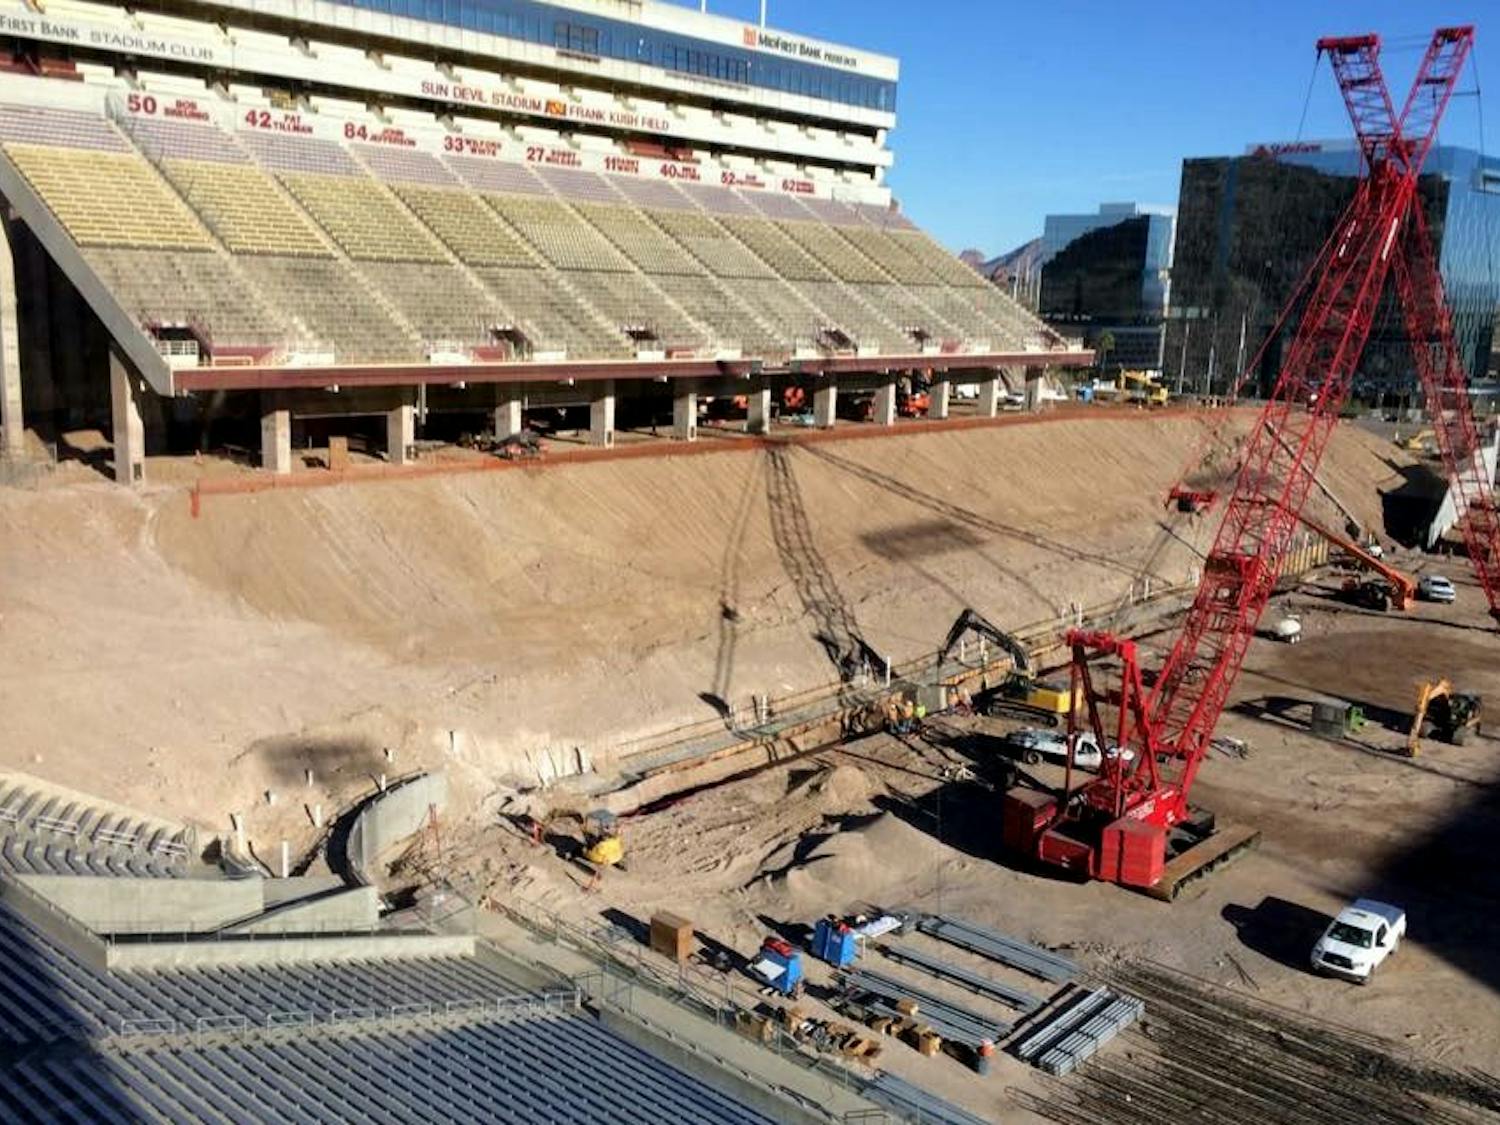 Construction on the Sun Devil Stadium in Tempe continues on Tuesday, Feb. 23, 2016. 